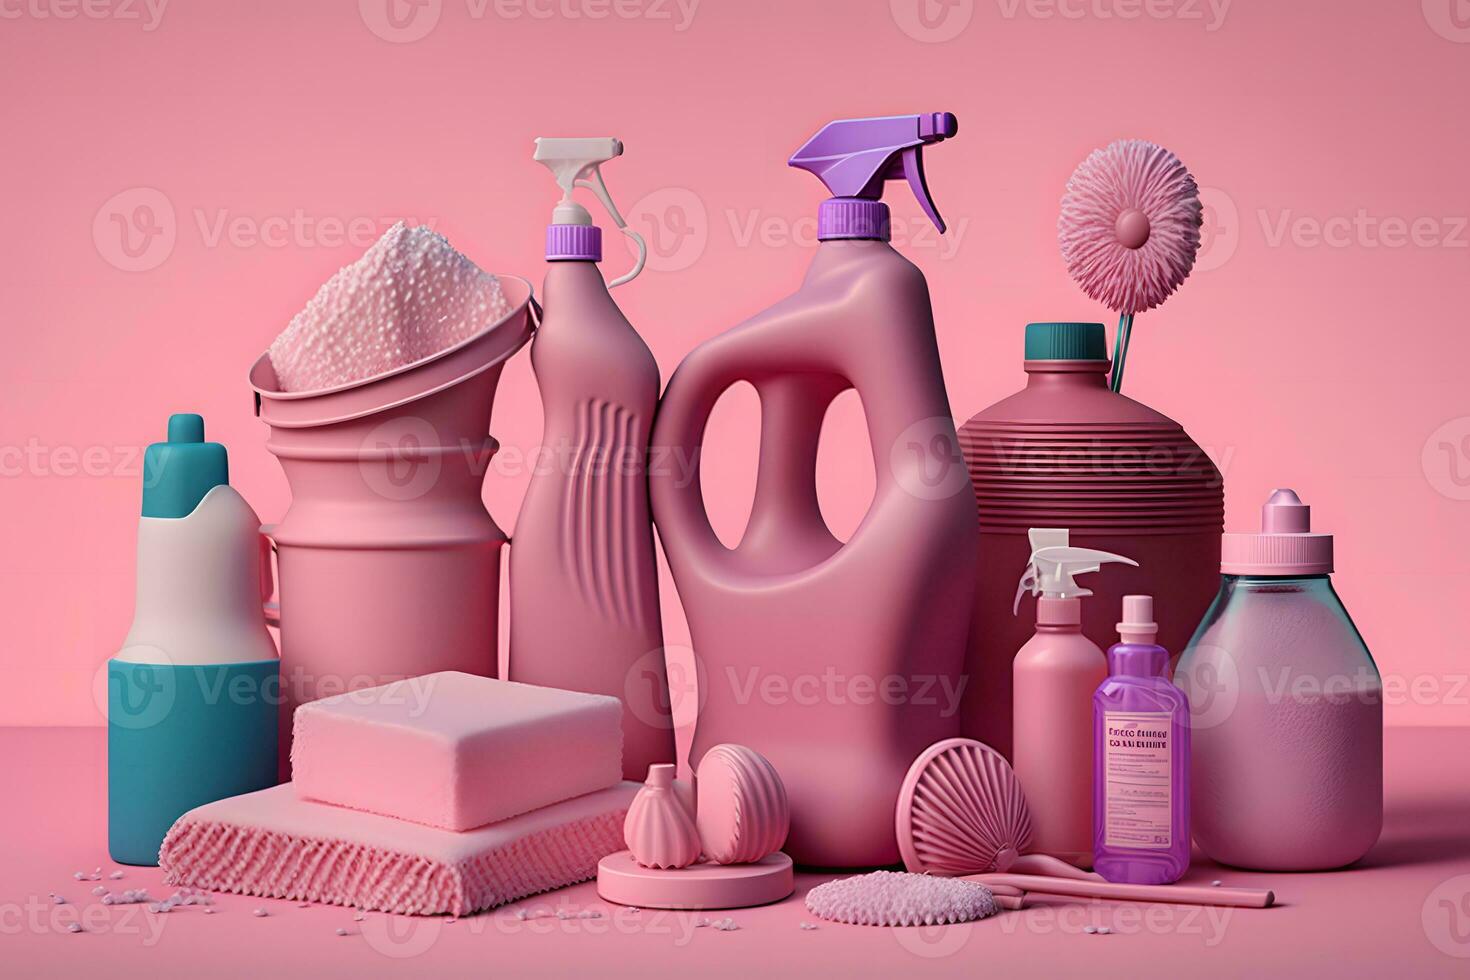 Creative still life with supplies for cleaning or housekeeping on podiums over pink background. Neural network AI generated photo